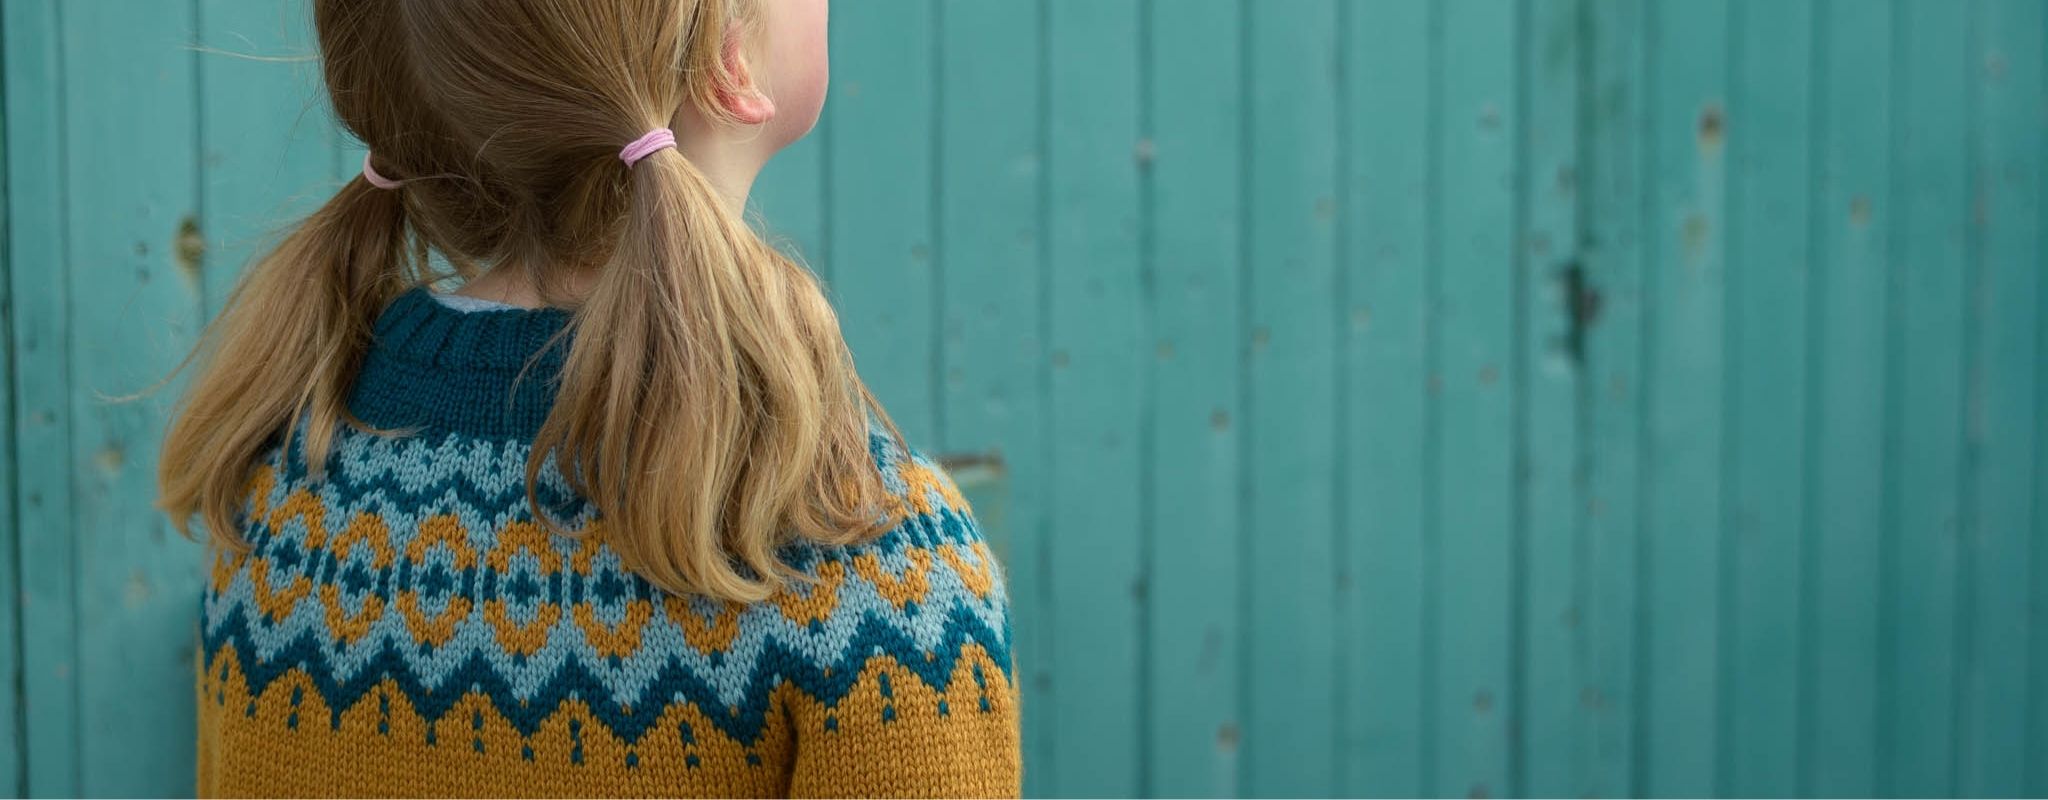 Cropped image showing a blond child with pigtails looking away from the camera, wearing the Brunstane Sweater in the vintage palette. The background is a turquoise painted wooden wall.